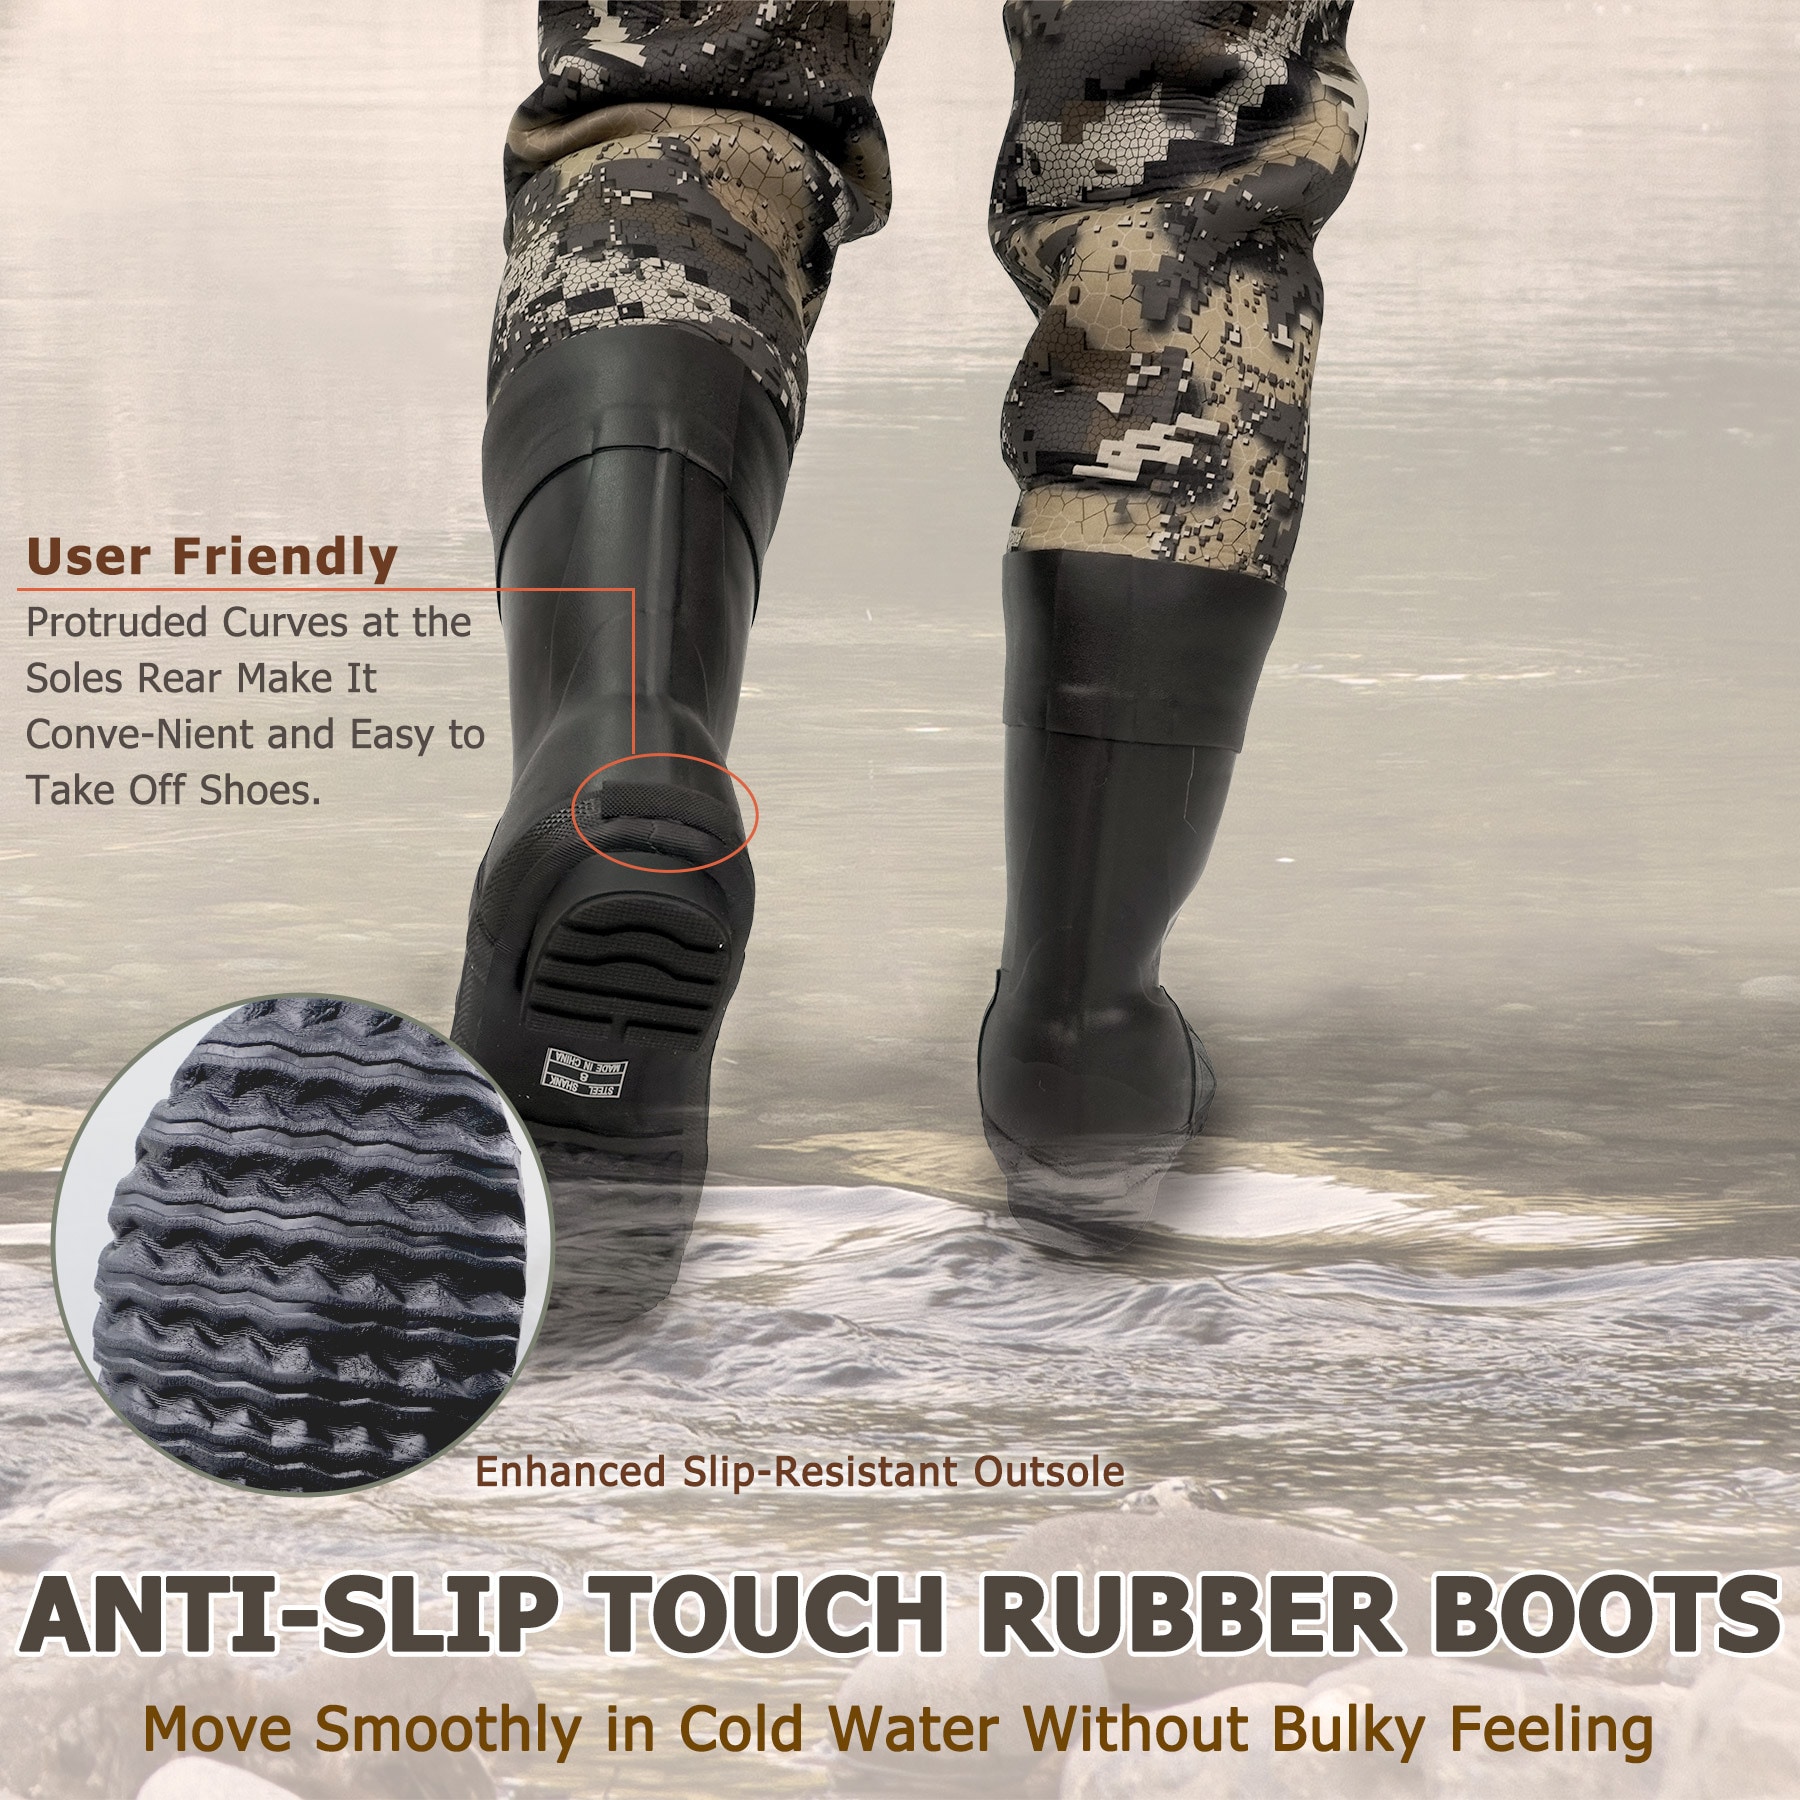 CAMOZONE Neoprene Chest Waders with Boots-size13 Unisex Fishing Jacket in  the Fishing Gear & Apparel department at